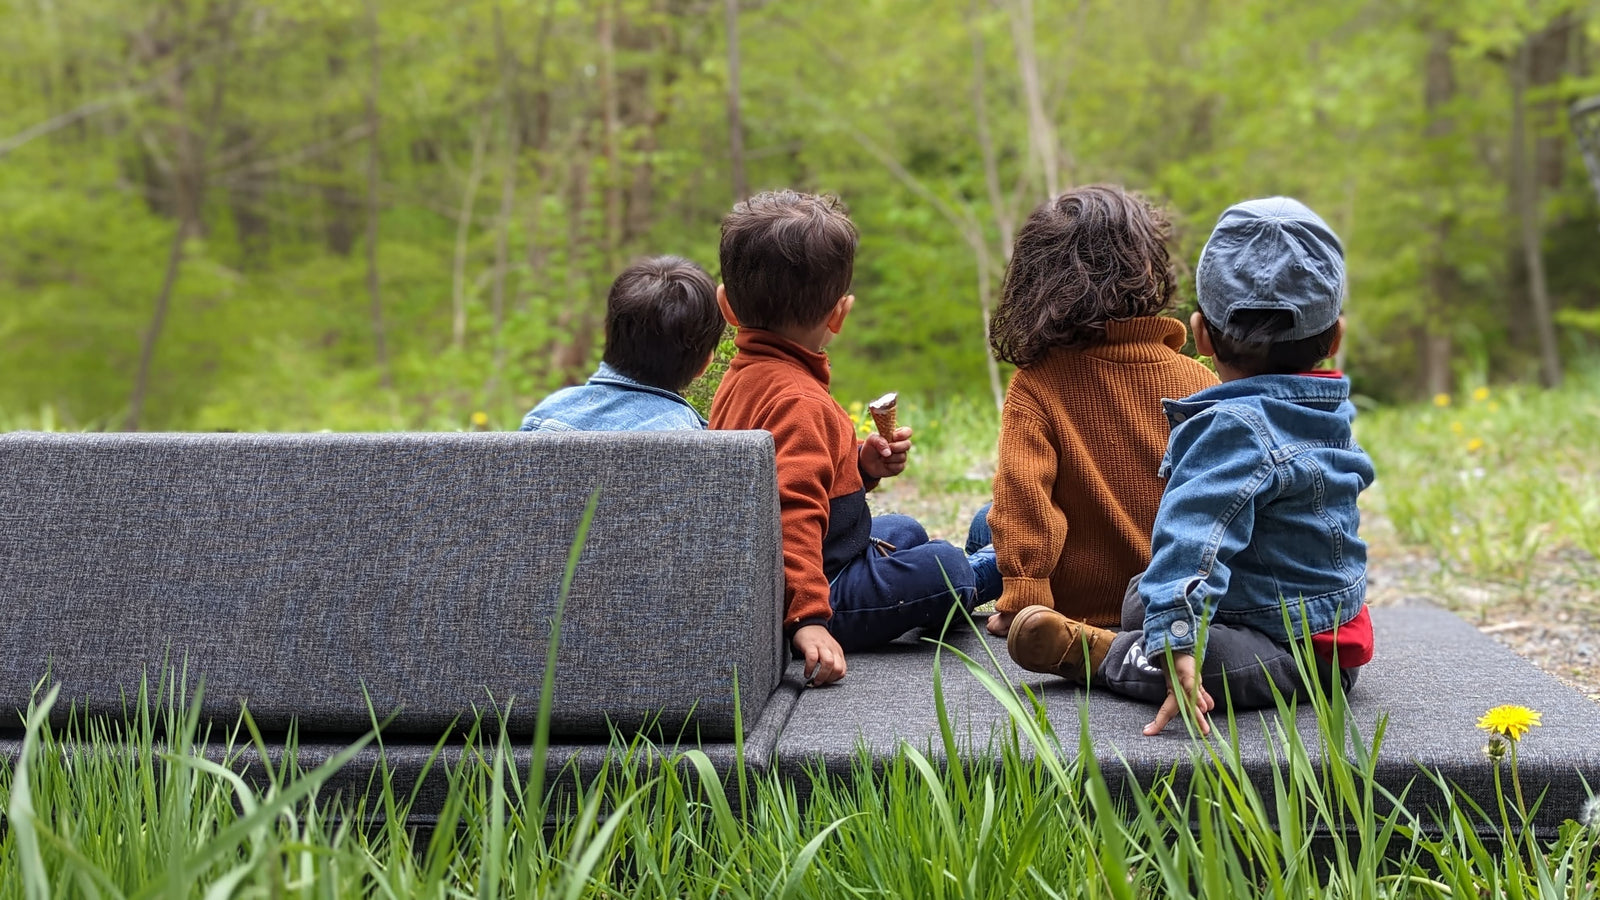 18 Fun and Effortless Outdoor Activities for Toddlers and Young Children